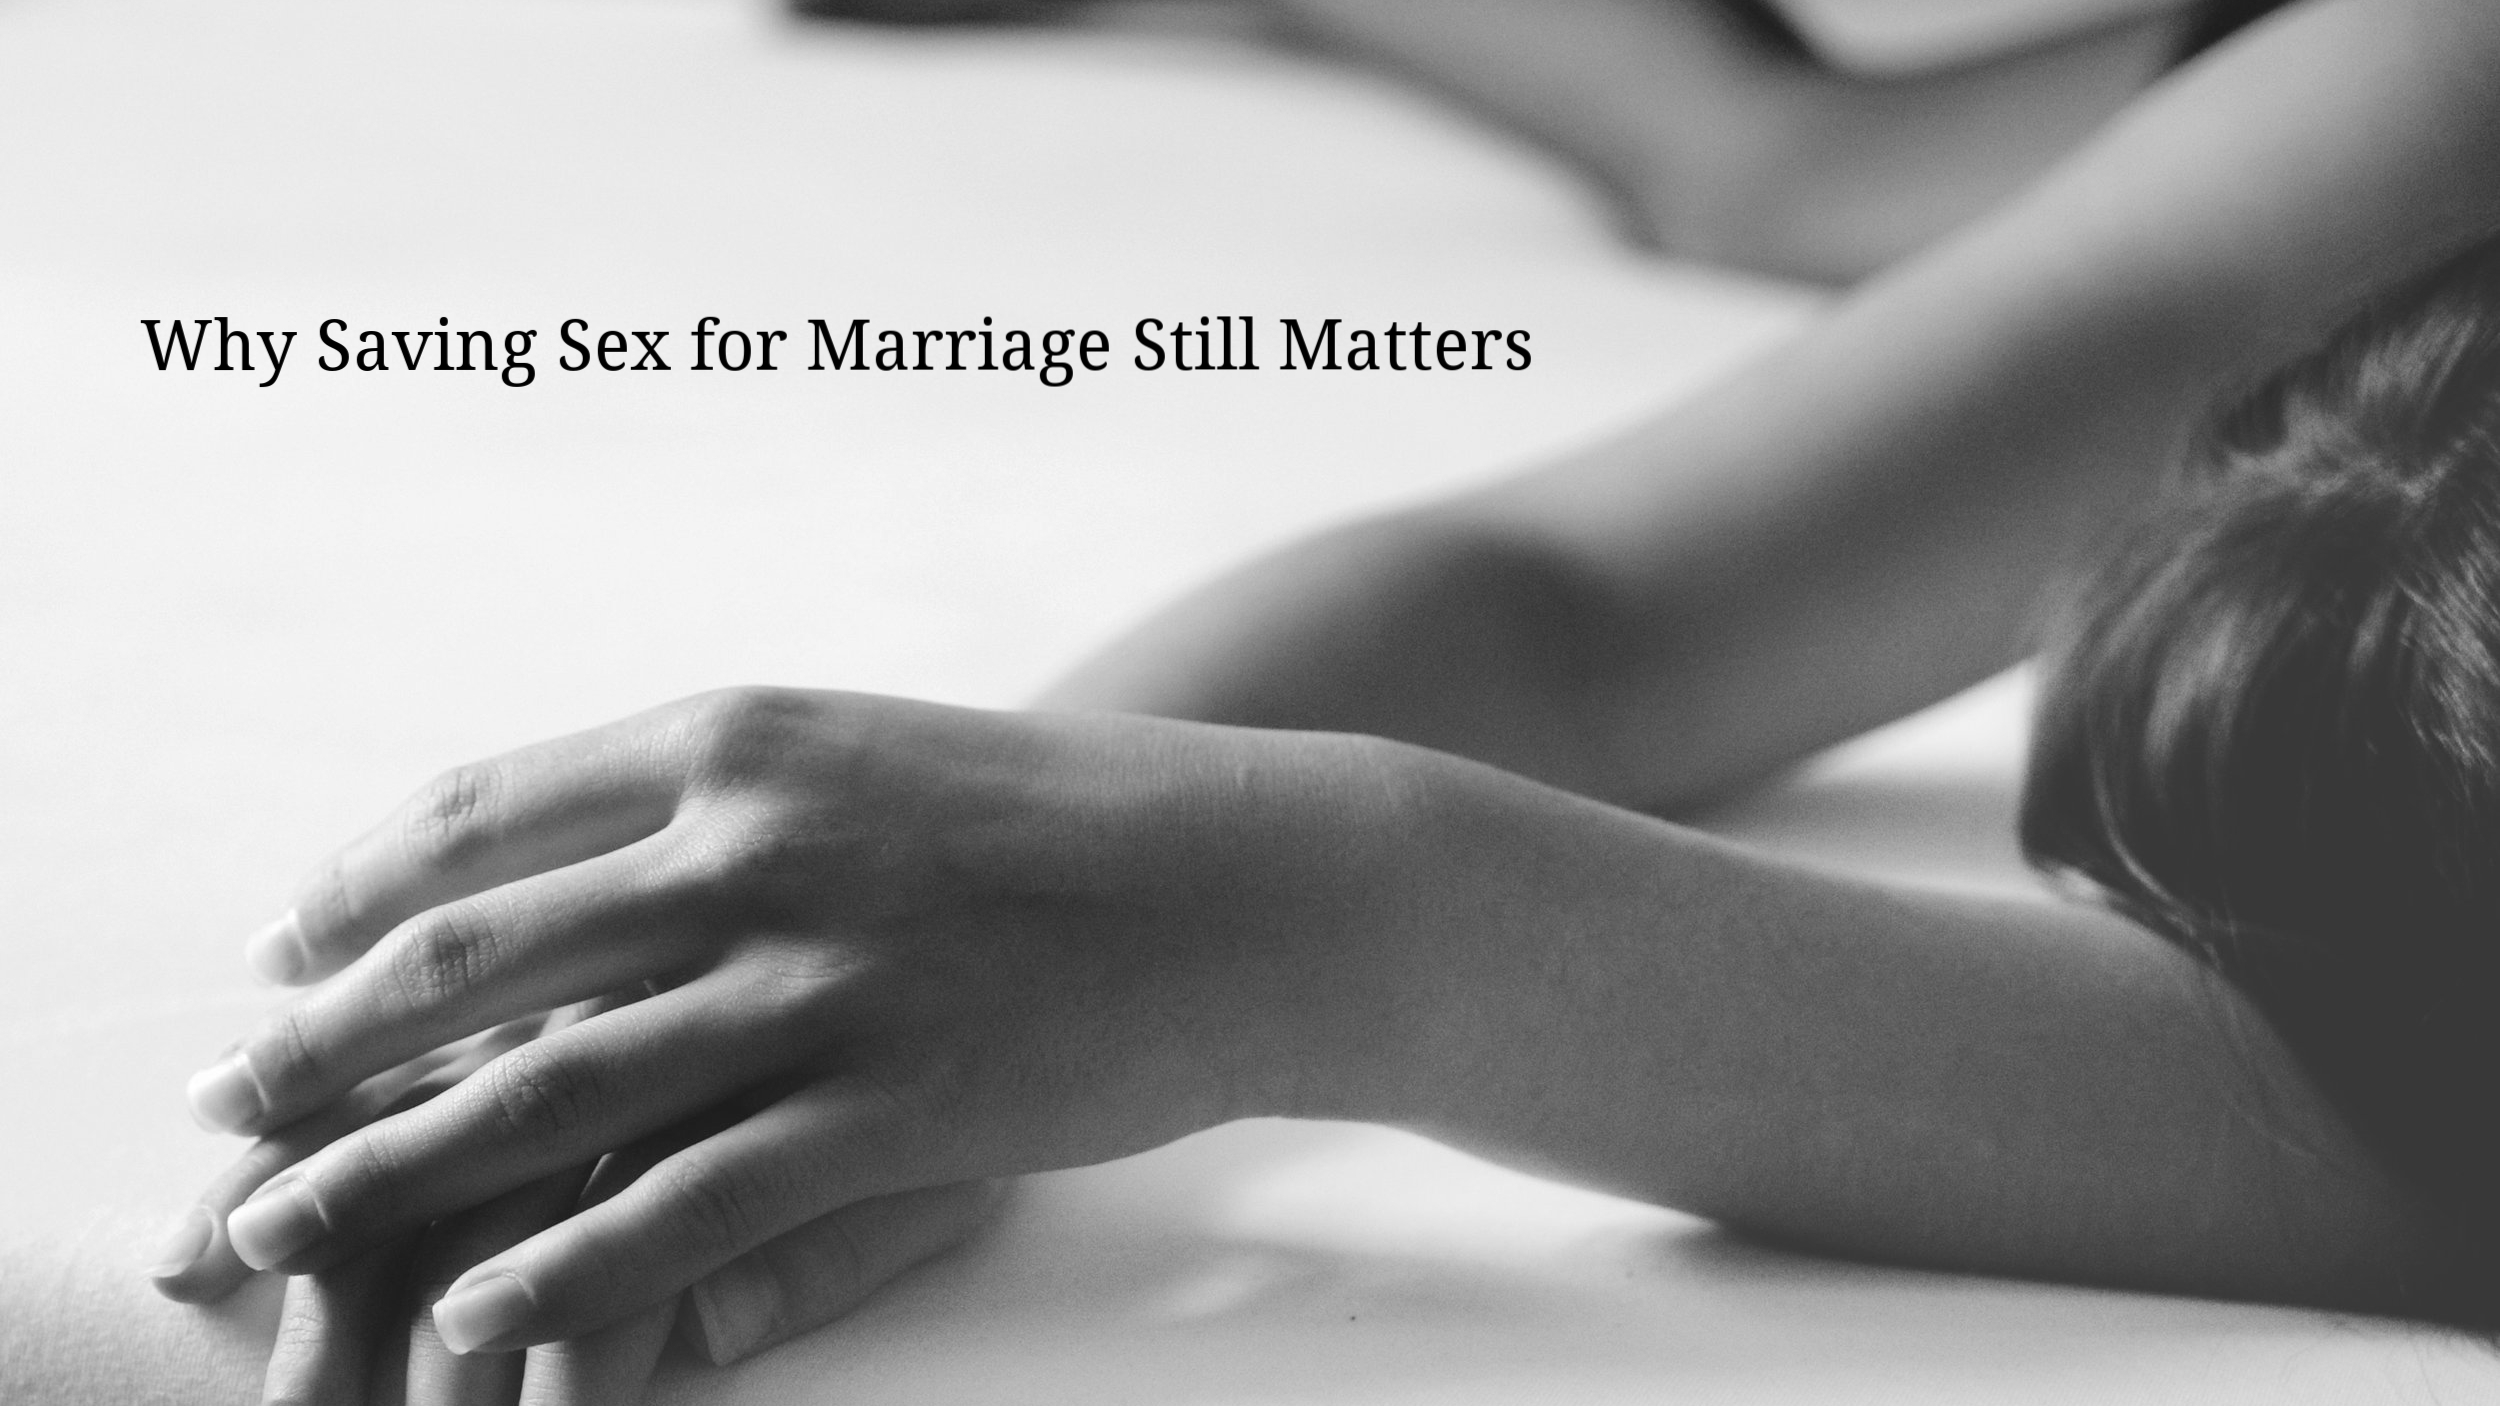 Why Saving Sex for Marriage Still Matters John Diff